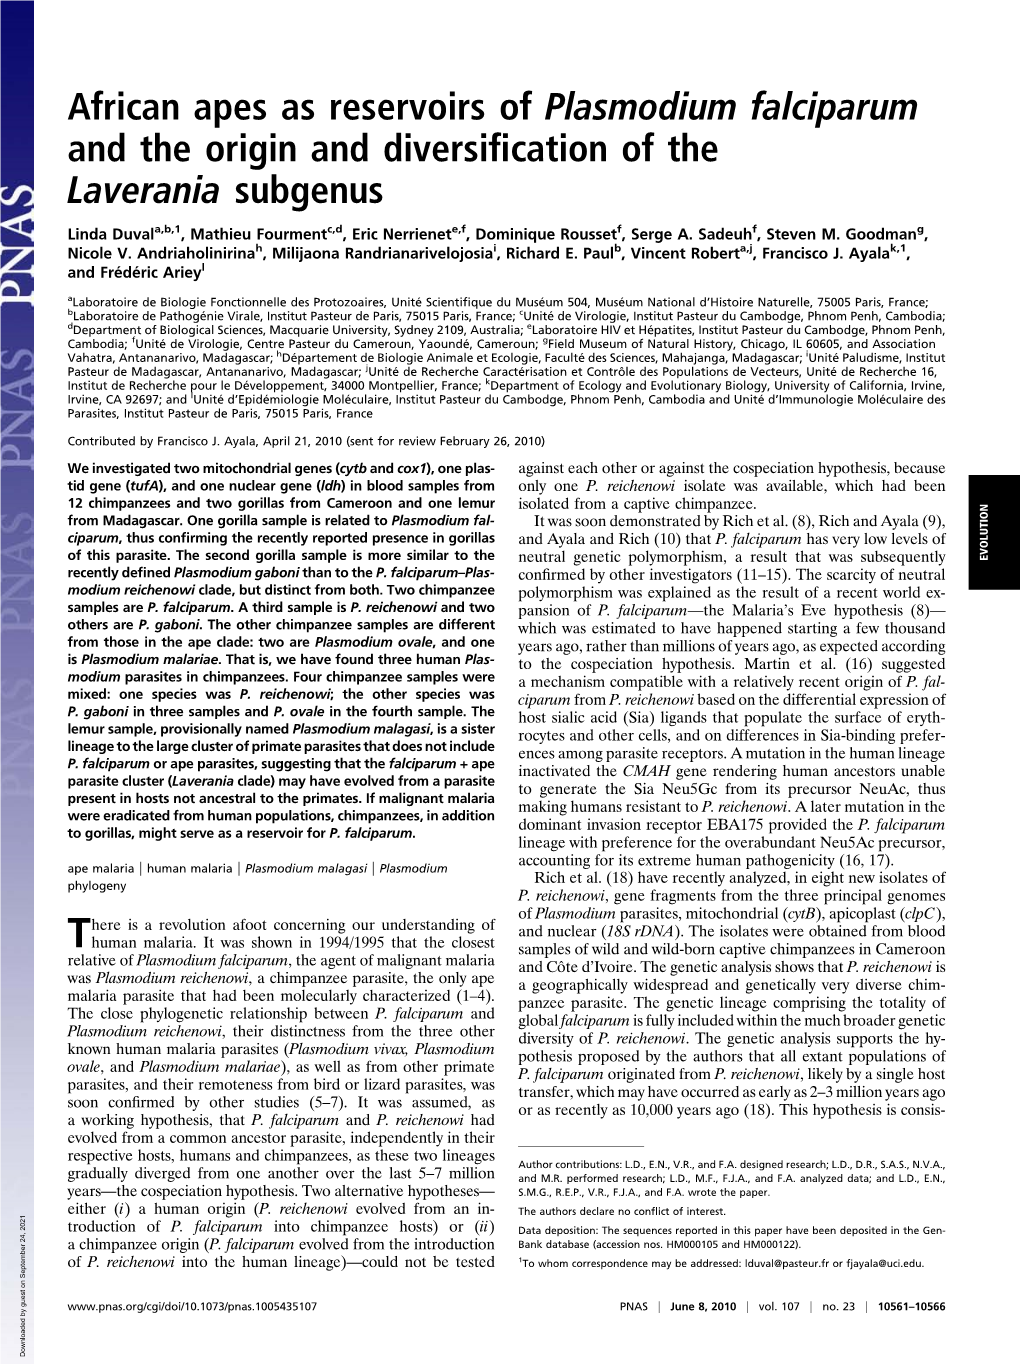 African Apes As Reservoirs of Plasmodium Falciparum and the Origin and Diversiﬁcation of the Laverania Subgenus